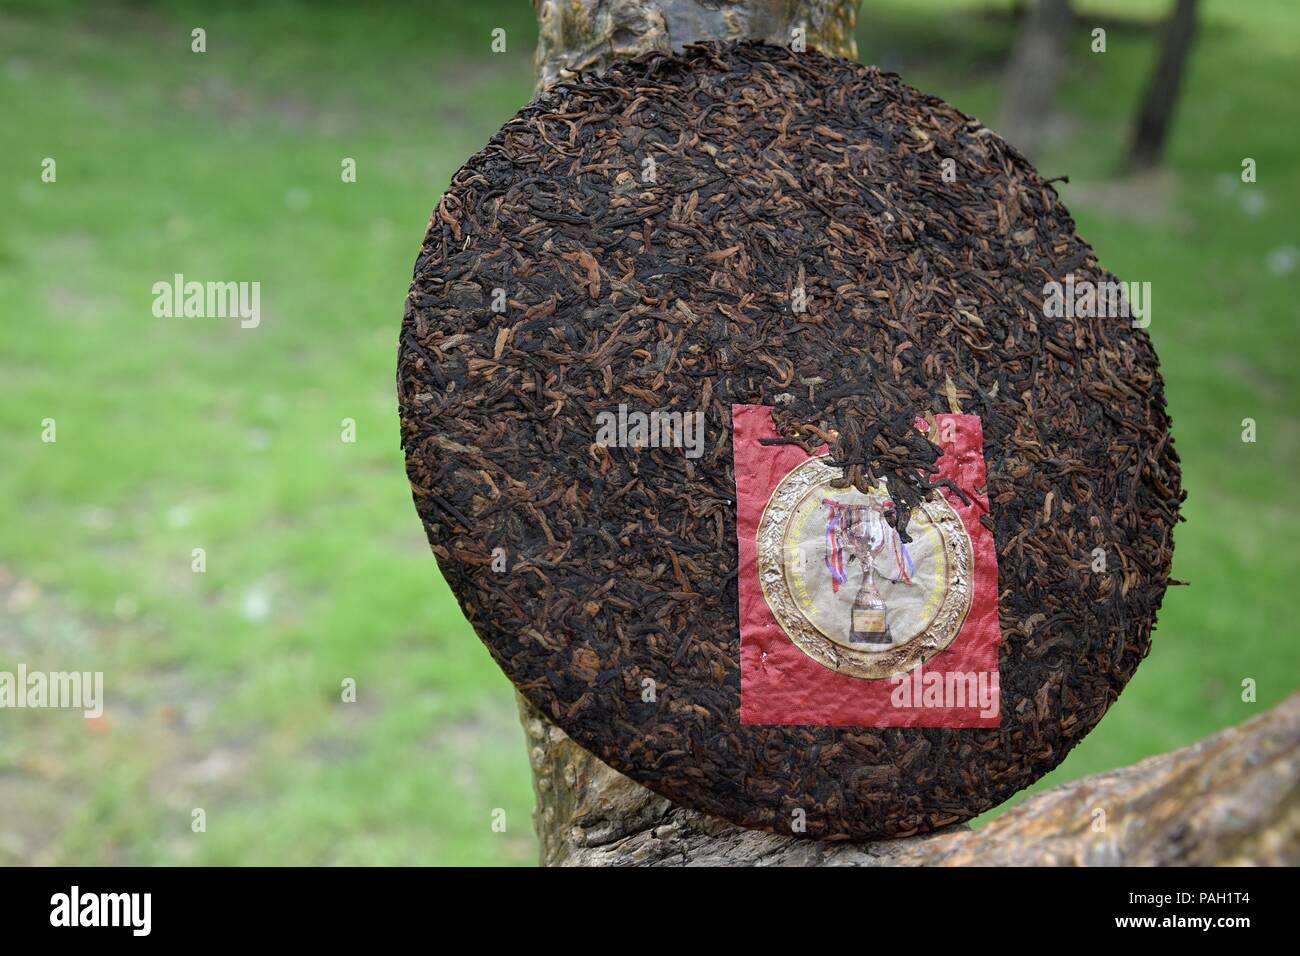 The Ripe Pu Erh Tea Cake With A Label Prize Winning Tea The Traditional Chinese Black Tea From Yunnan Province In The Natural Background Stock Photo Alamy